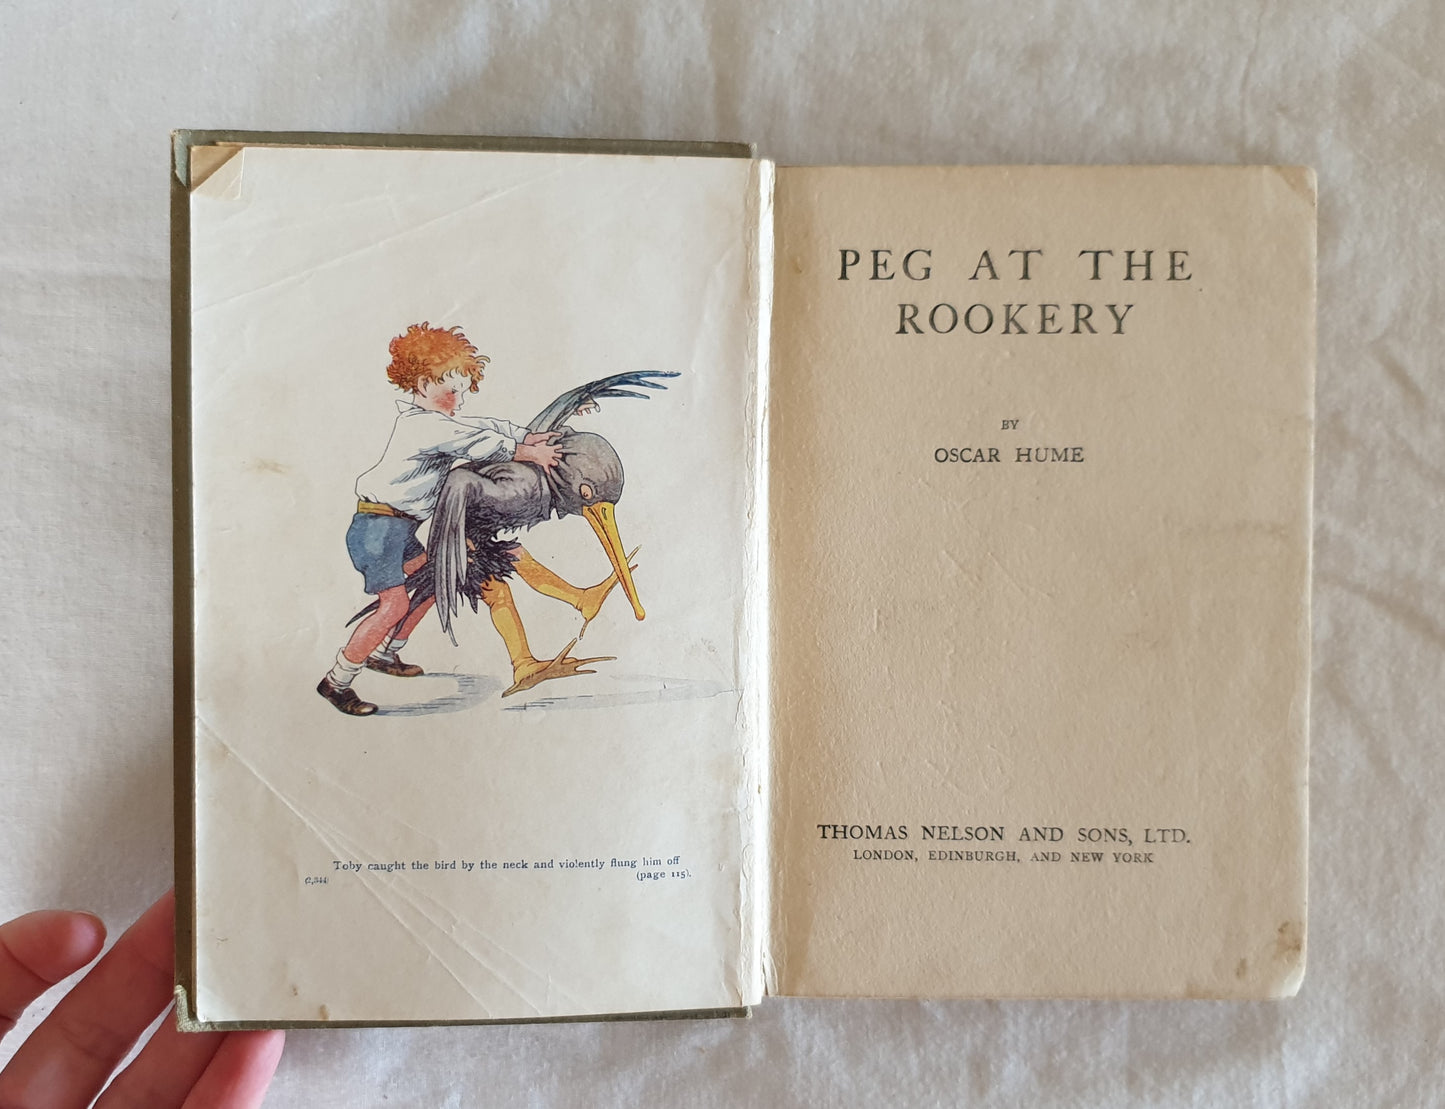 Peg at the Rookery by Oscar Hume